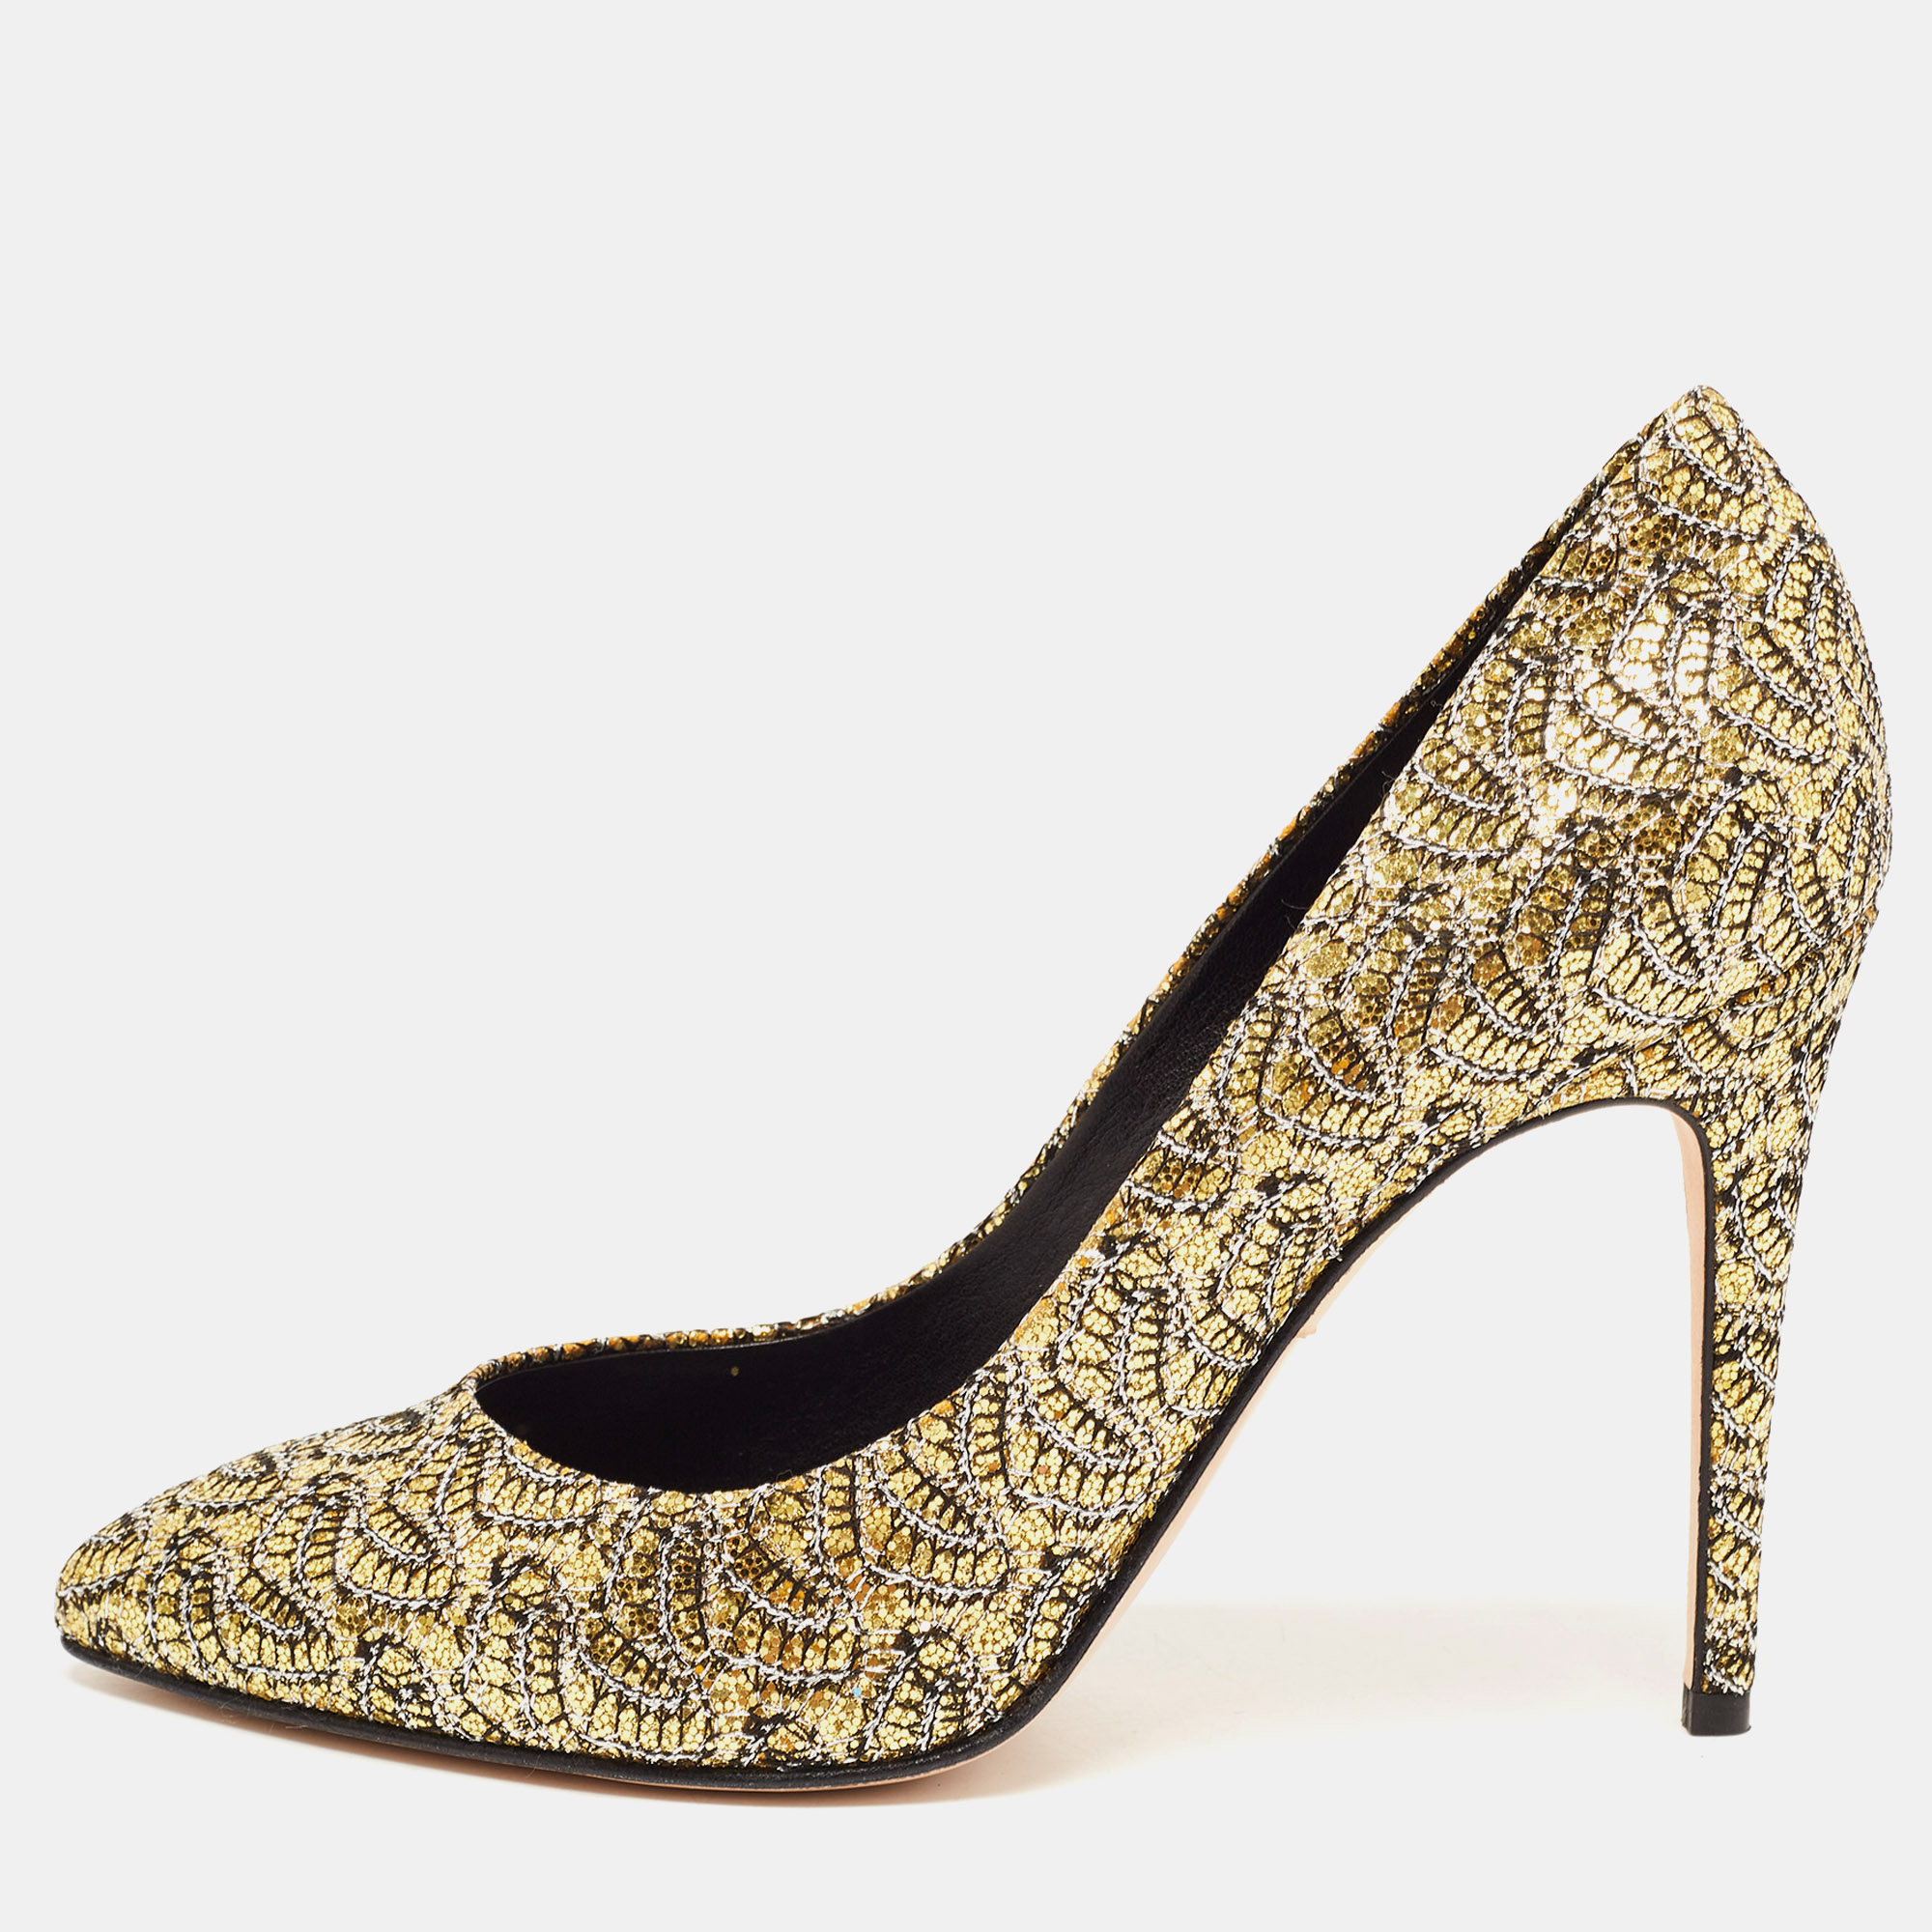 

Gina Metallic Gold/Silver Glitter Lace Pointed Toe Pumps Size